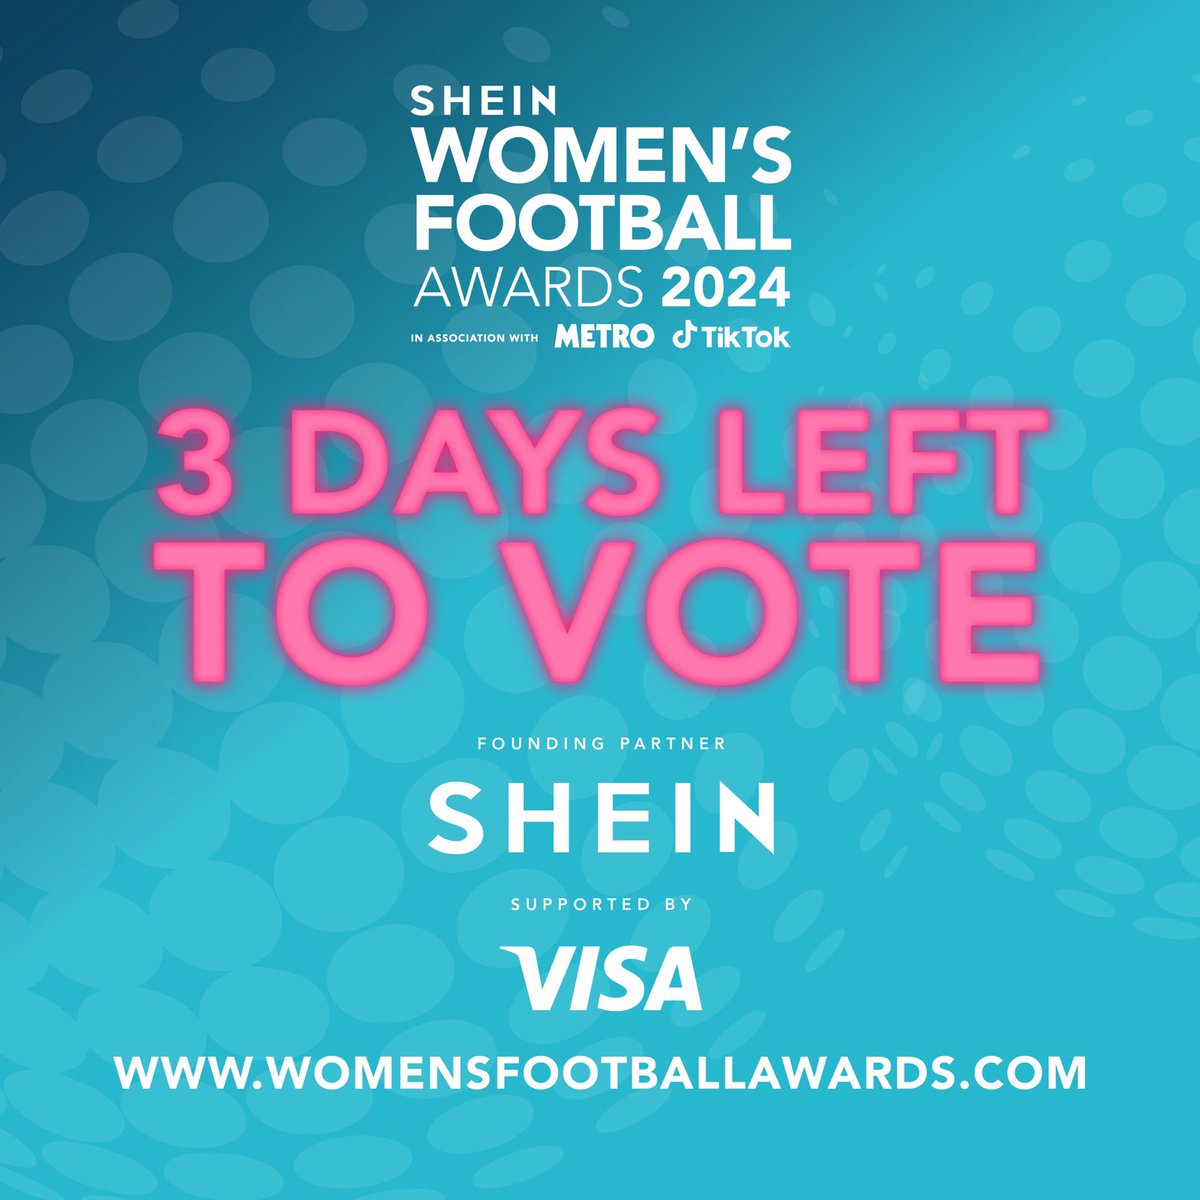 Only 3 DAYS left to vote for the 2024 Women's Football Awards! ⚽️ Don't miss your chance to celebrate the game-changers of women's football. 🏆 #WFA24